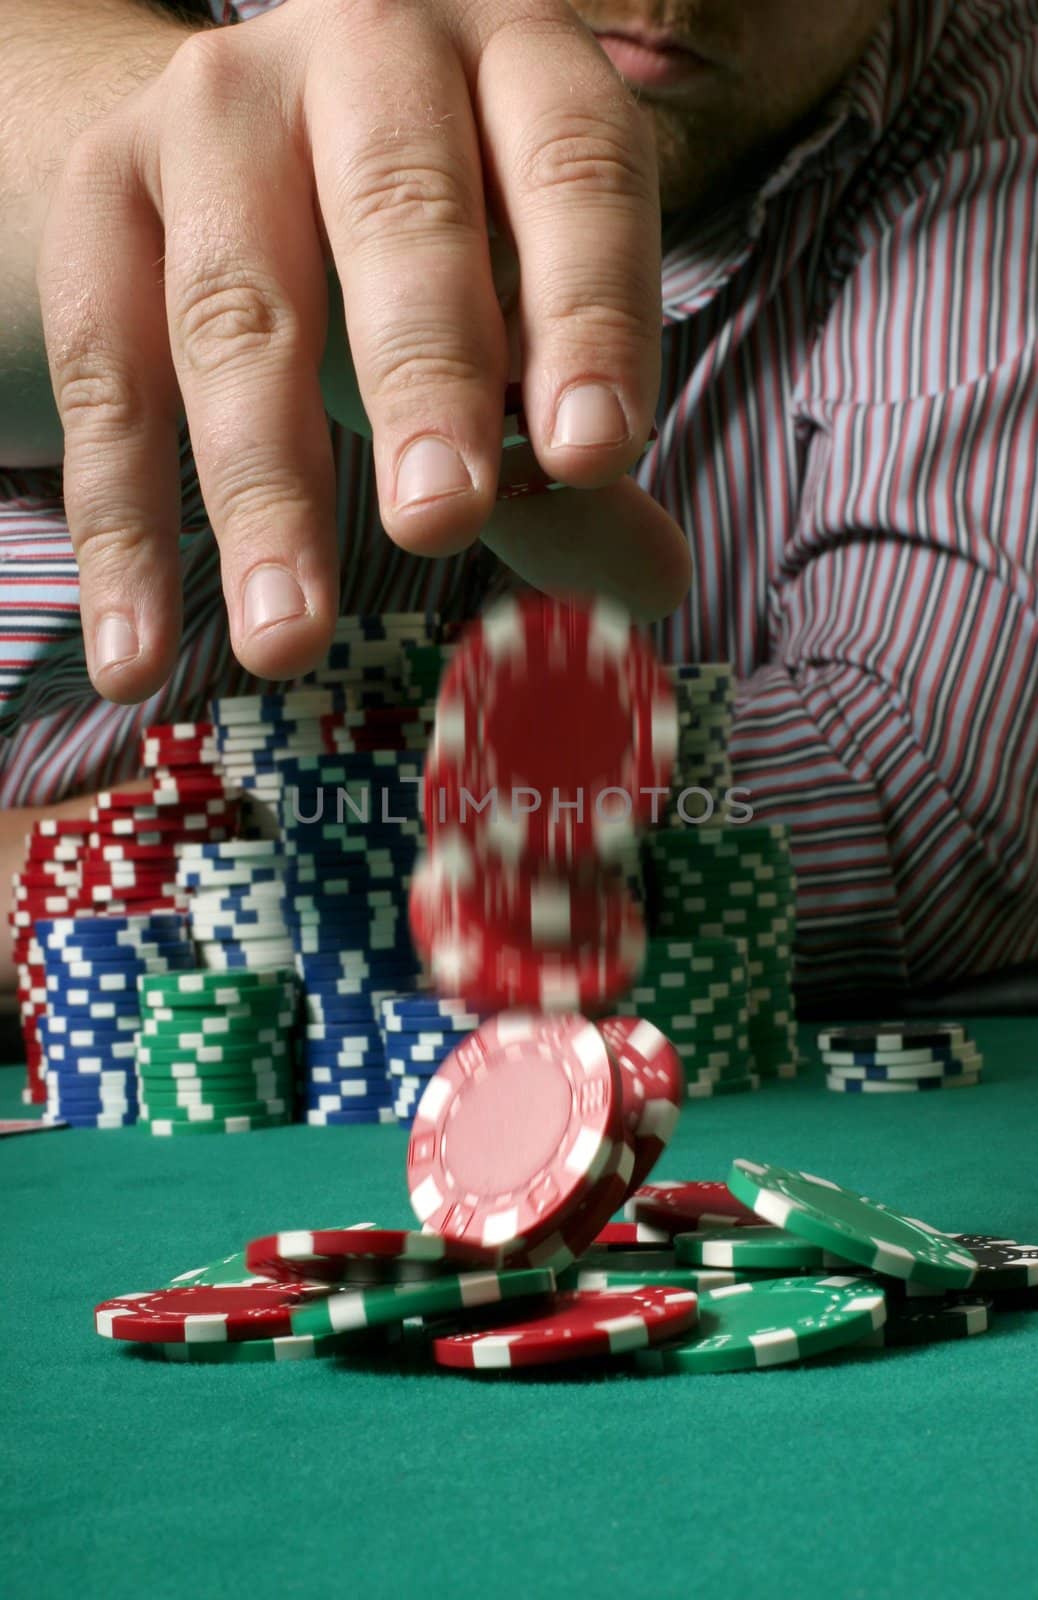 Poker player placing a confiden bet on the table - chips motion blurred